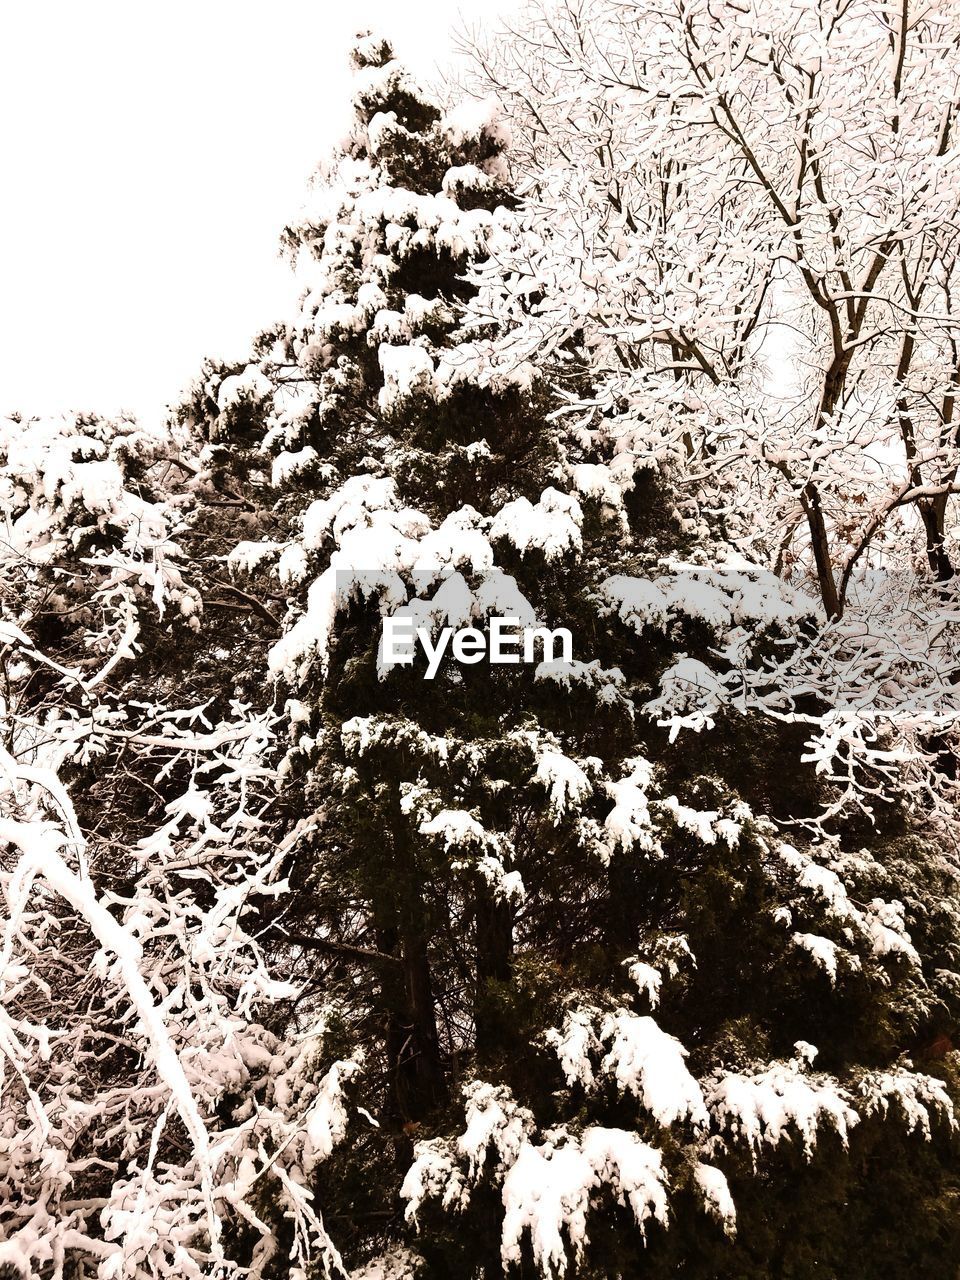 CLOSE-UP OF TREE IN SNOW